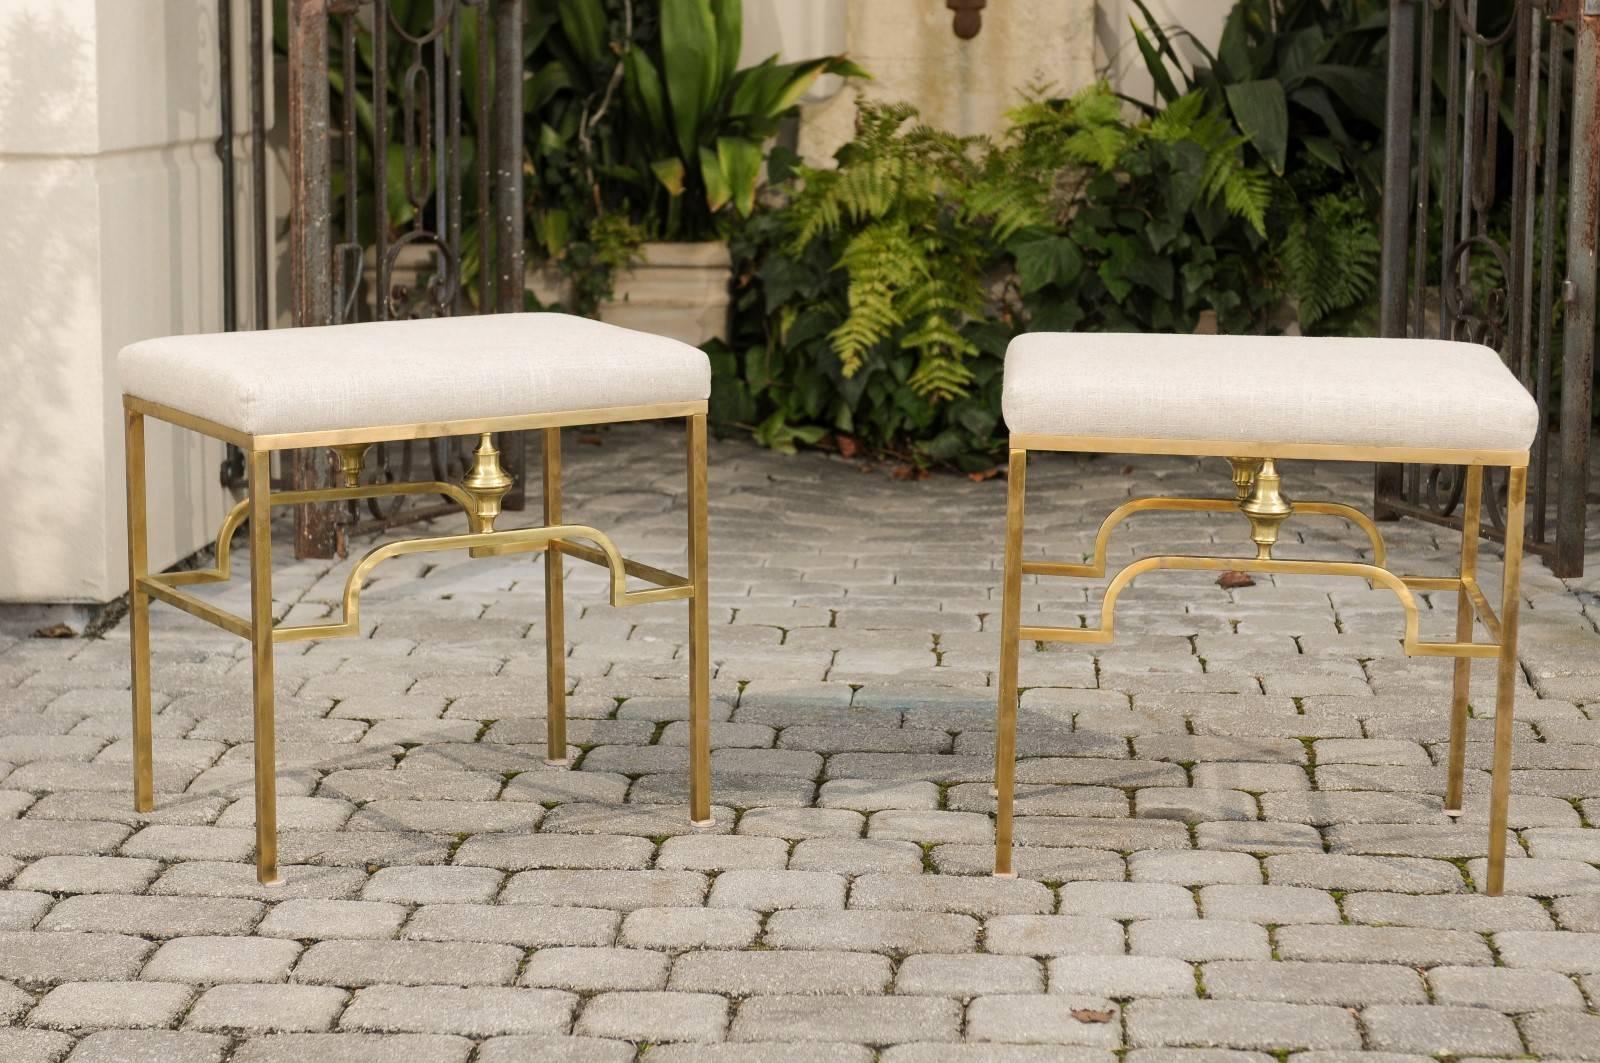 A pair of Italian Mid-Century Modern brass stools with new linen upholstery. Each of this pair of vintage Italian stools features a rectangular linen-covered seat, resting on an Art Deco style brass armature. The clean lines of the base are